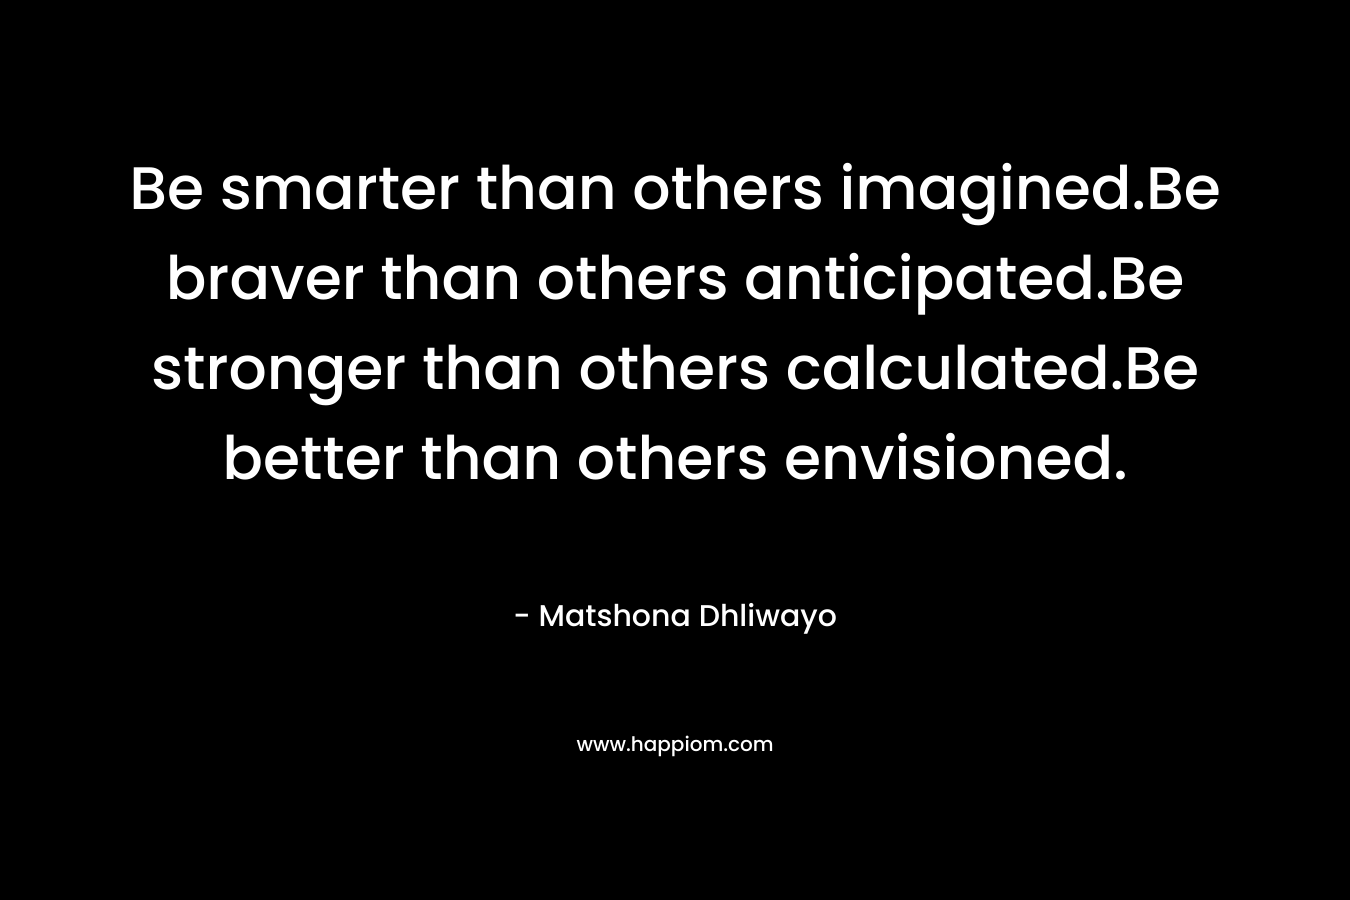 Be smarter than others imagined.Be braver than others anticipated.Be stronger than others calculated.Be better than others envisioned.